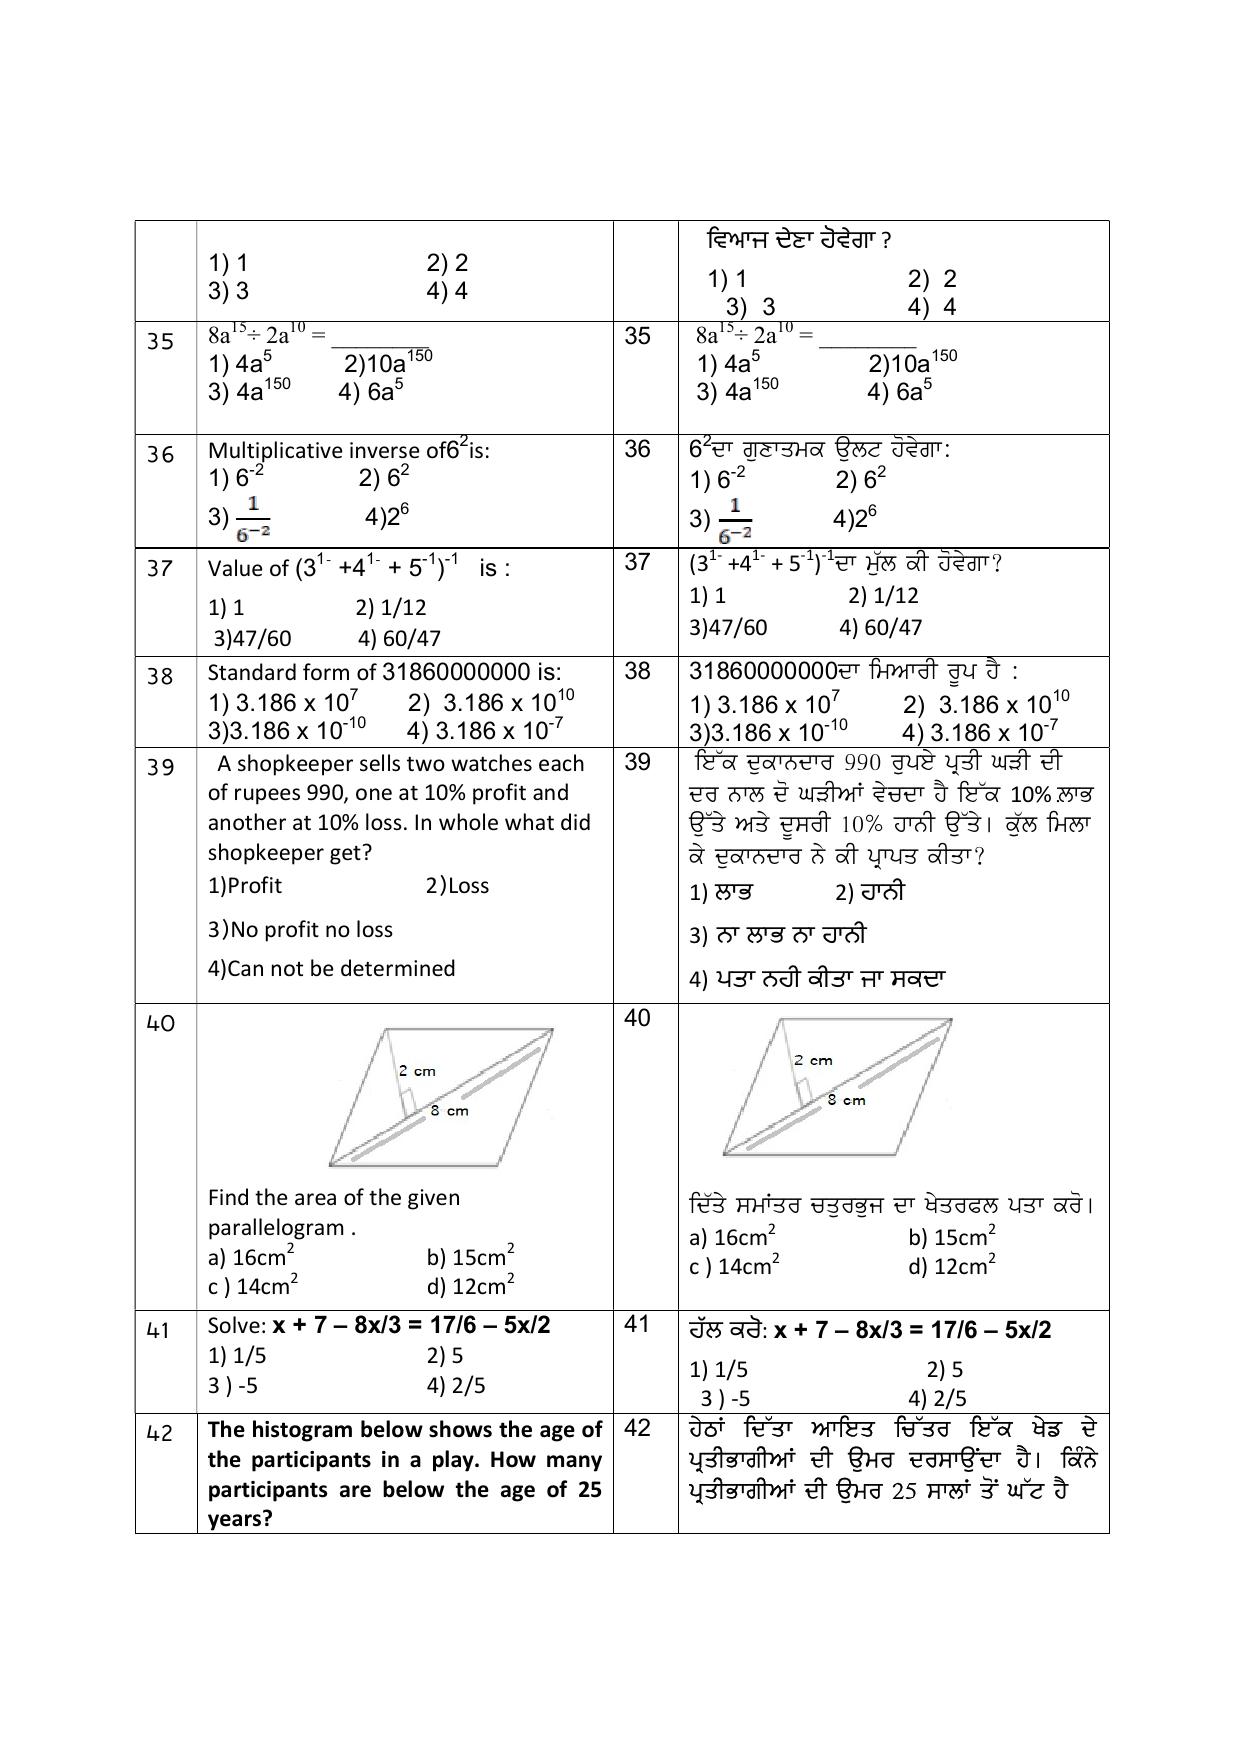 Punjab School of Eminence Class 9 Sample Question Paper - Page 6